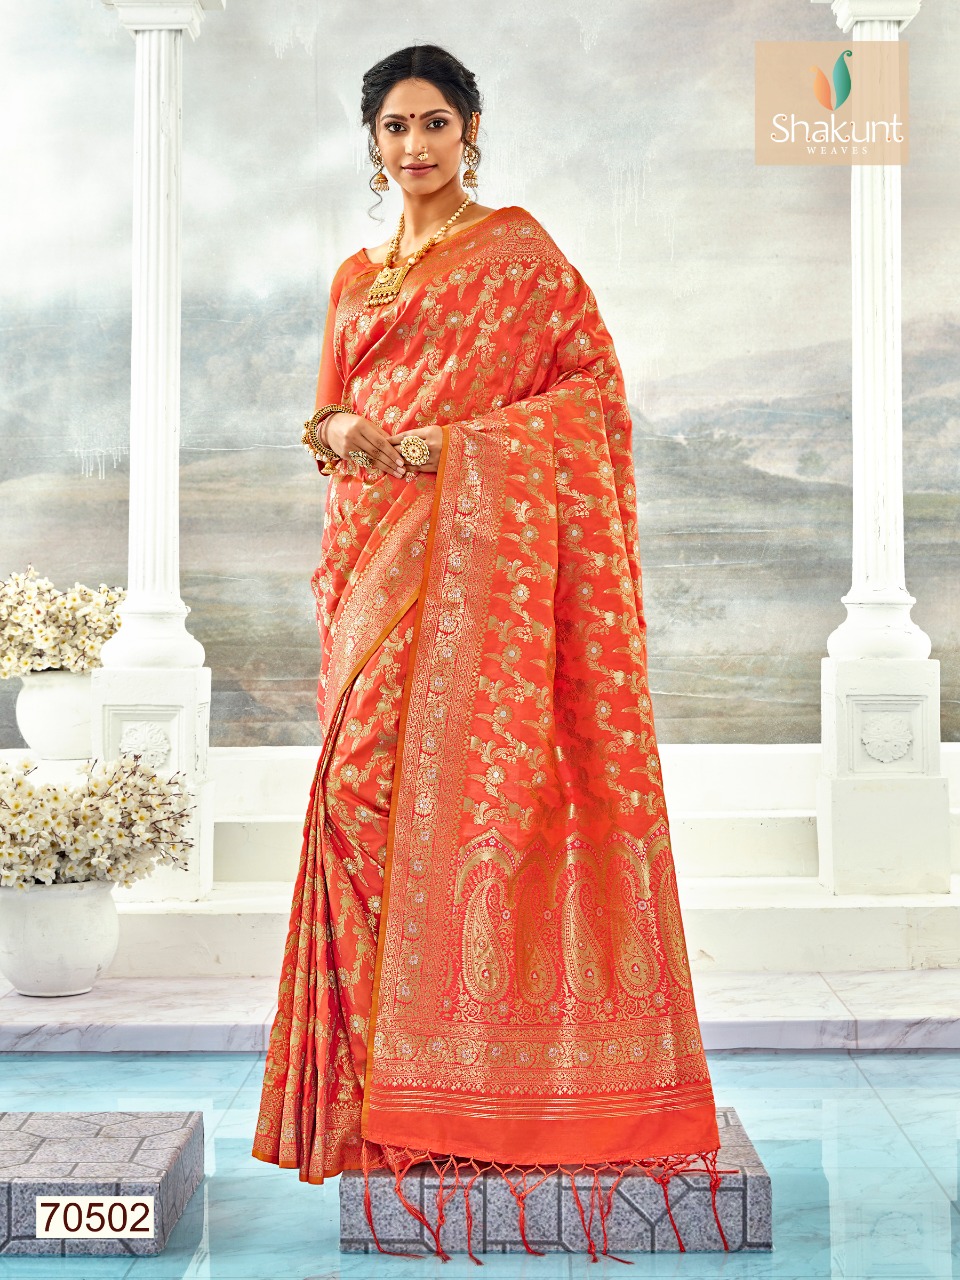 Shakunt weaves sejal Traditional silk saree collection